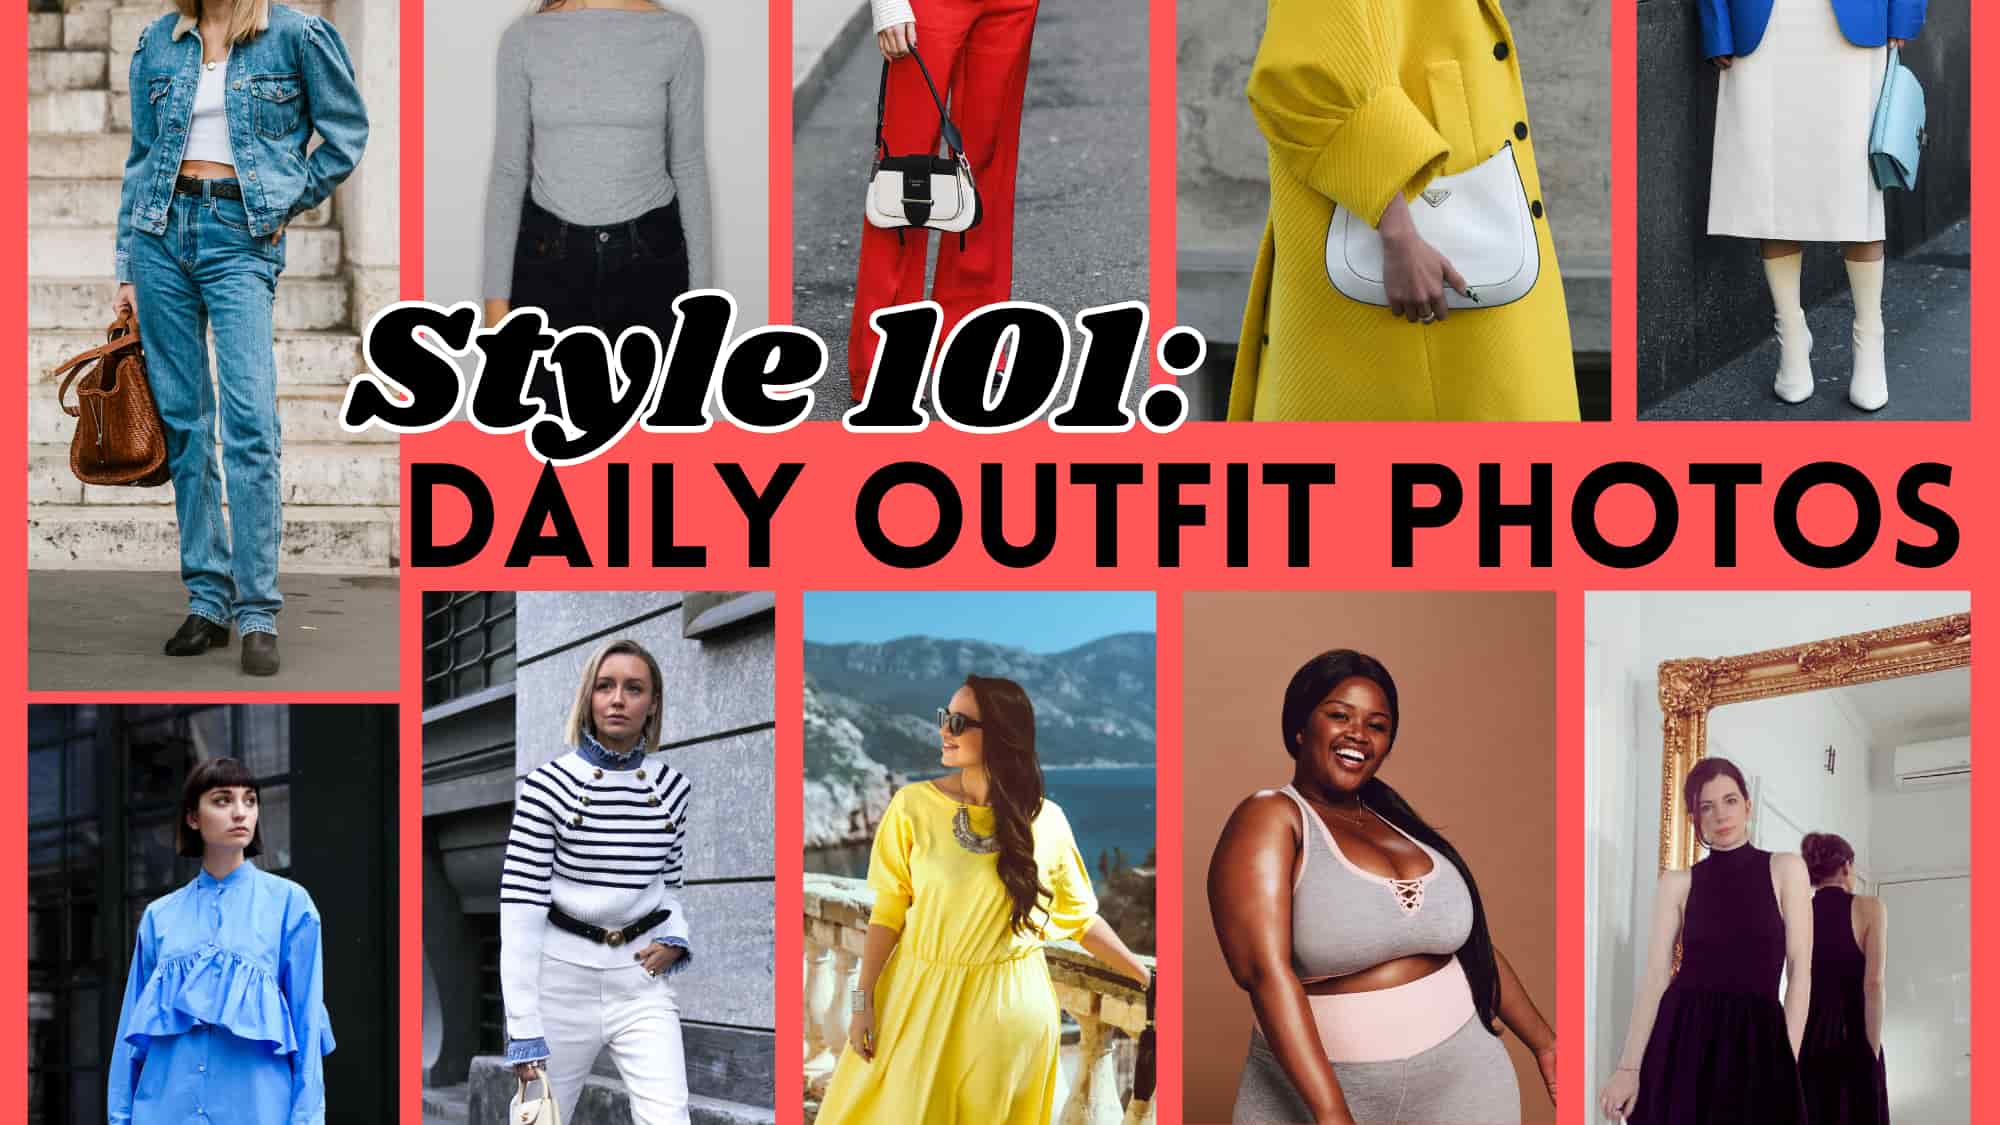 40+ Types of Fashion Styles, which one defines you!? - Gabrielle Arruda